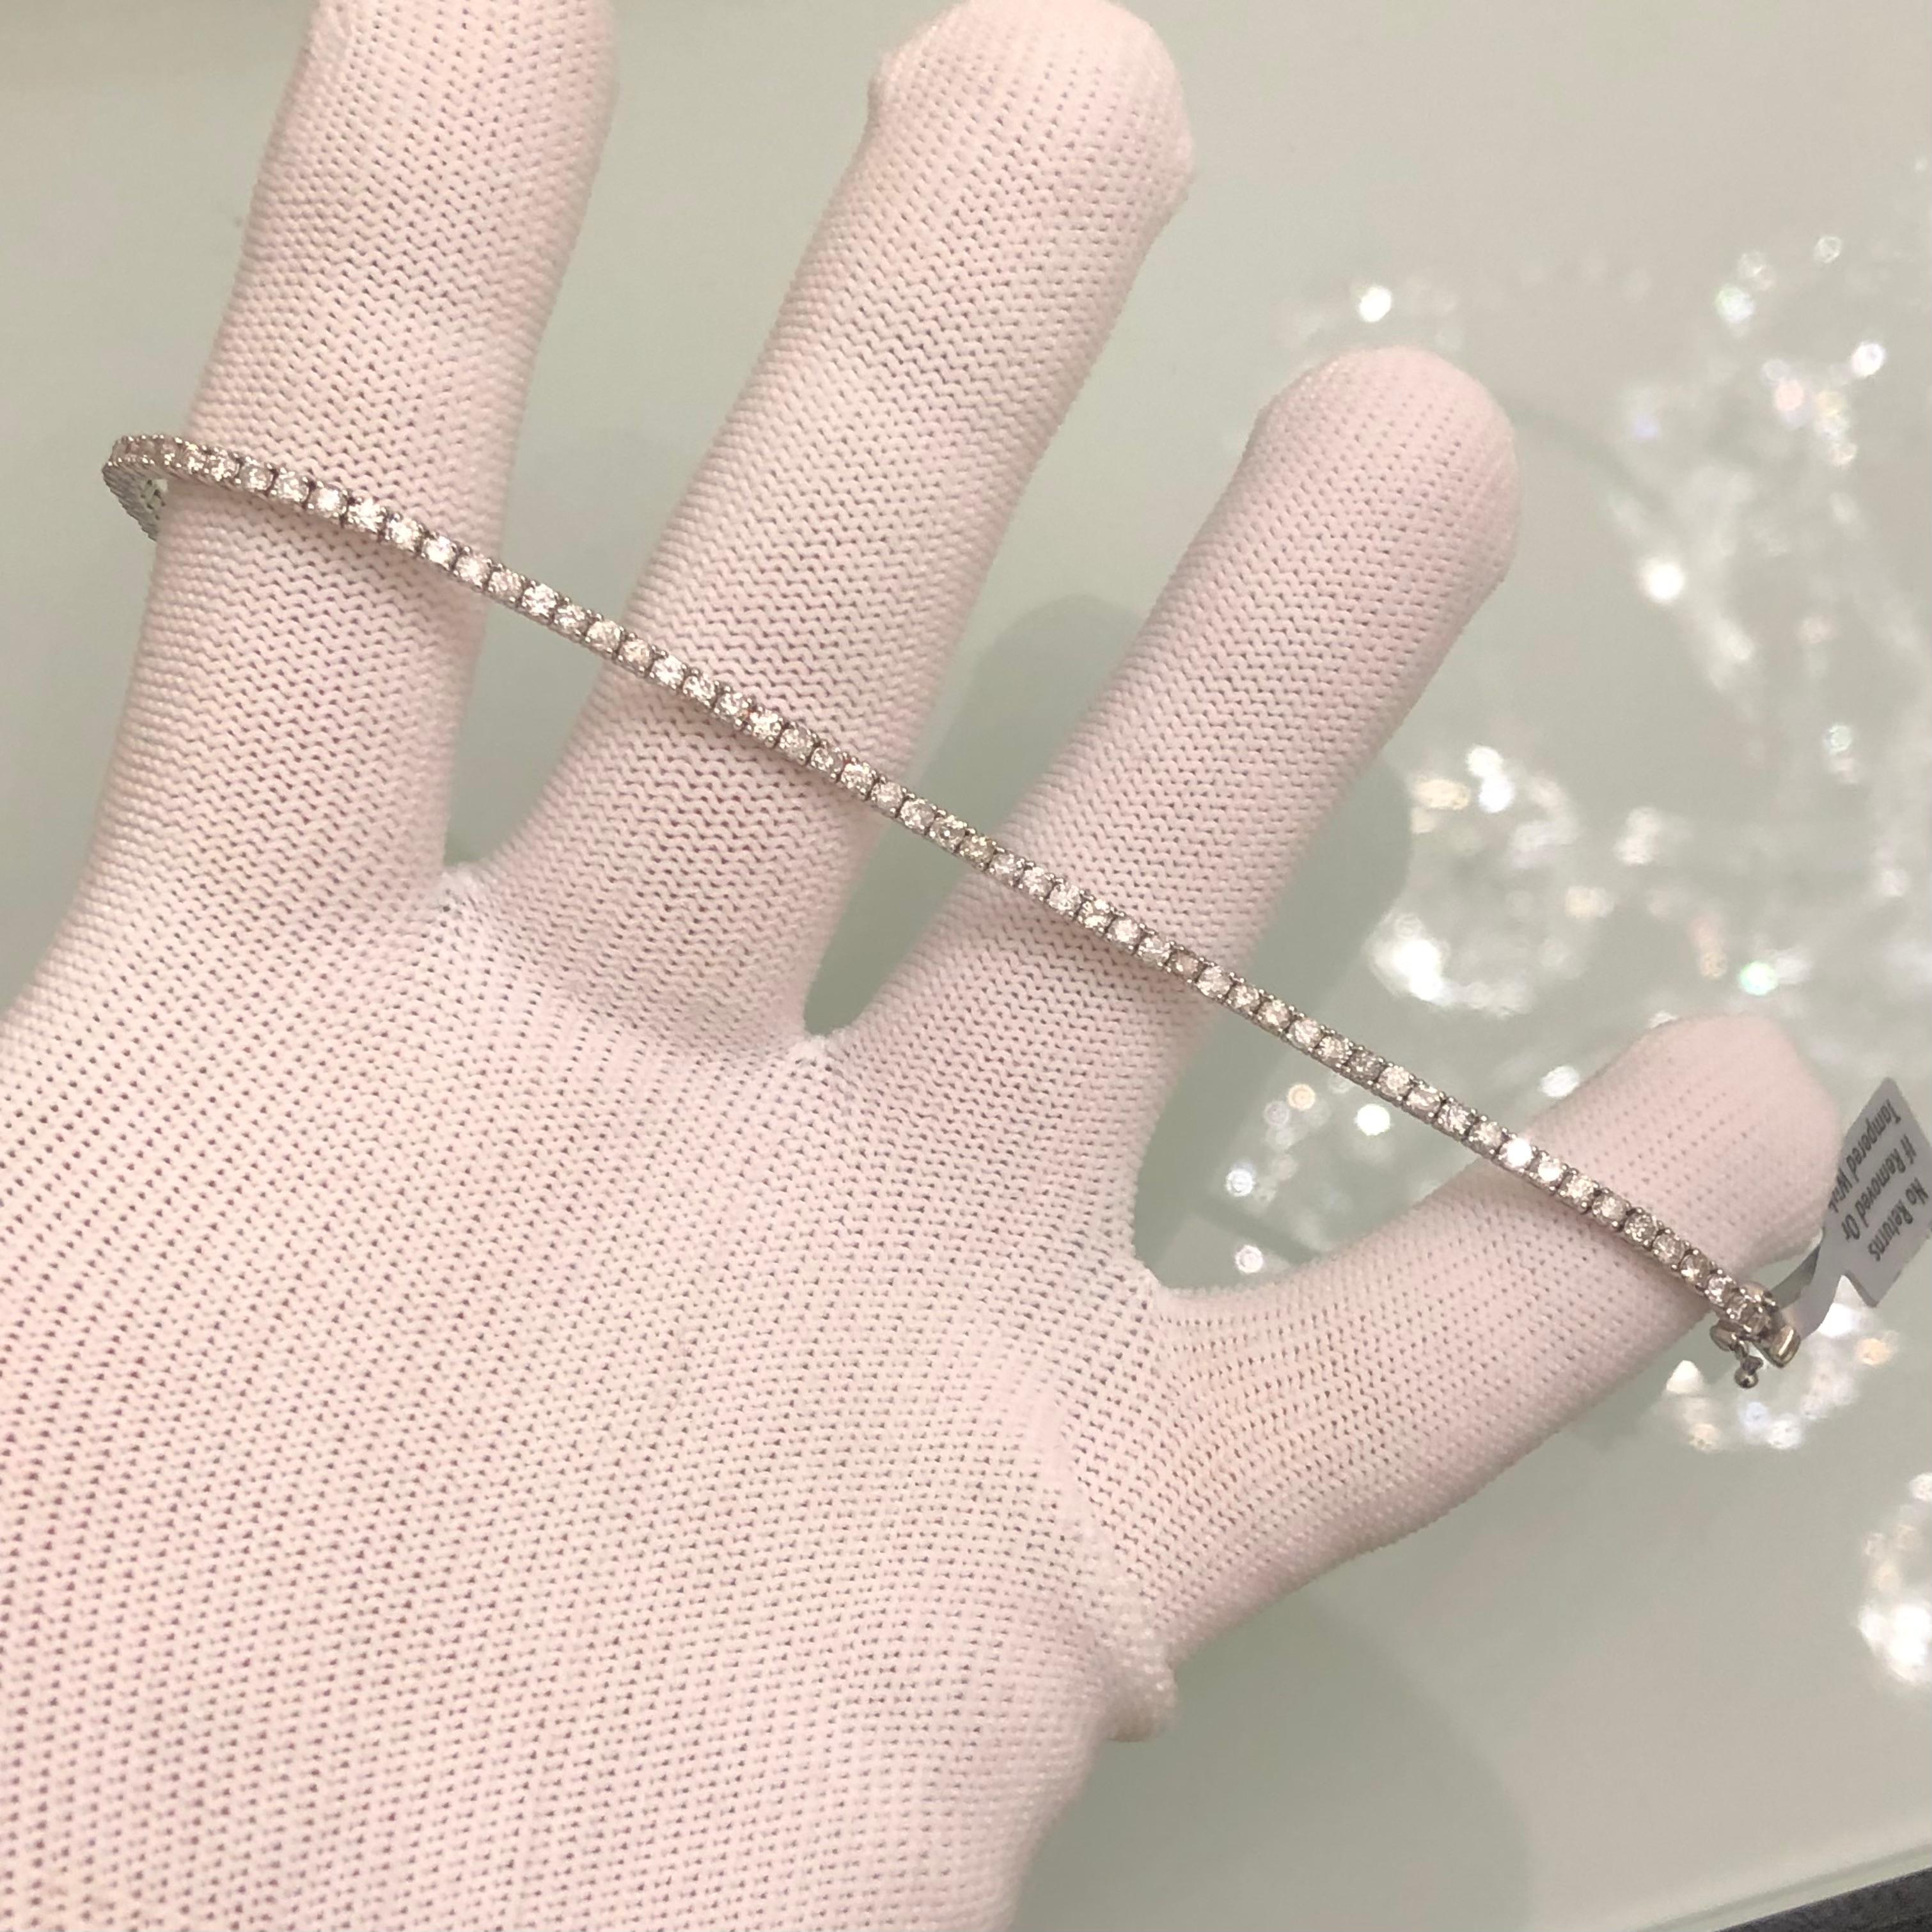 Classic 2 1/2 carat round natural diamond tennis link bracelet in 14k white gold. 76 round brilliant natural diamonds (SI-I clarity, natural earth-mined) are hand set in this diamond tennis bracelet weighing approx. 2 1/2 carats.


This approx. 2